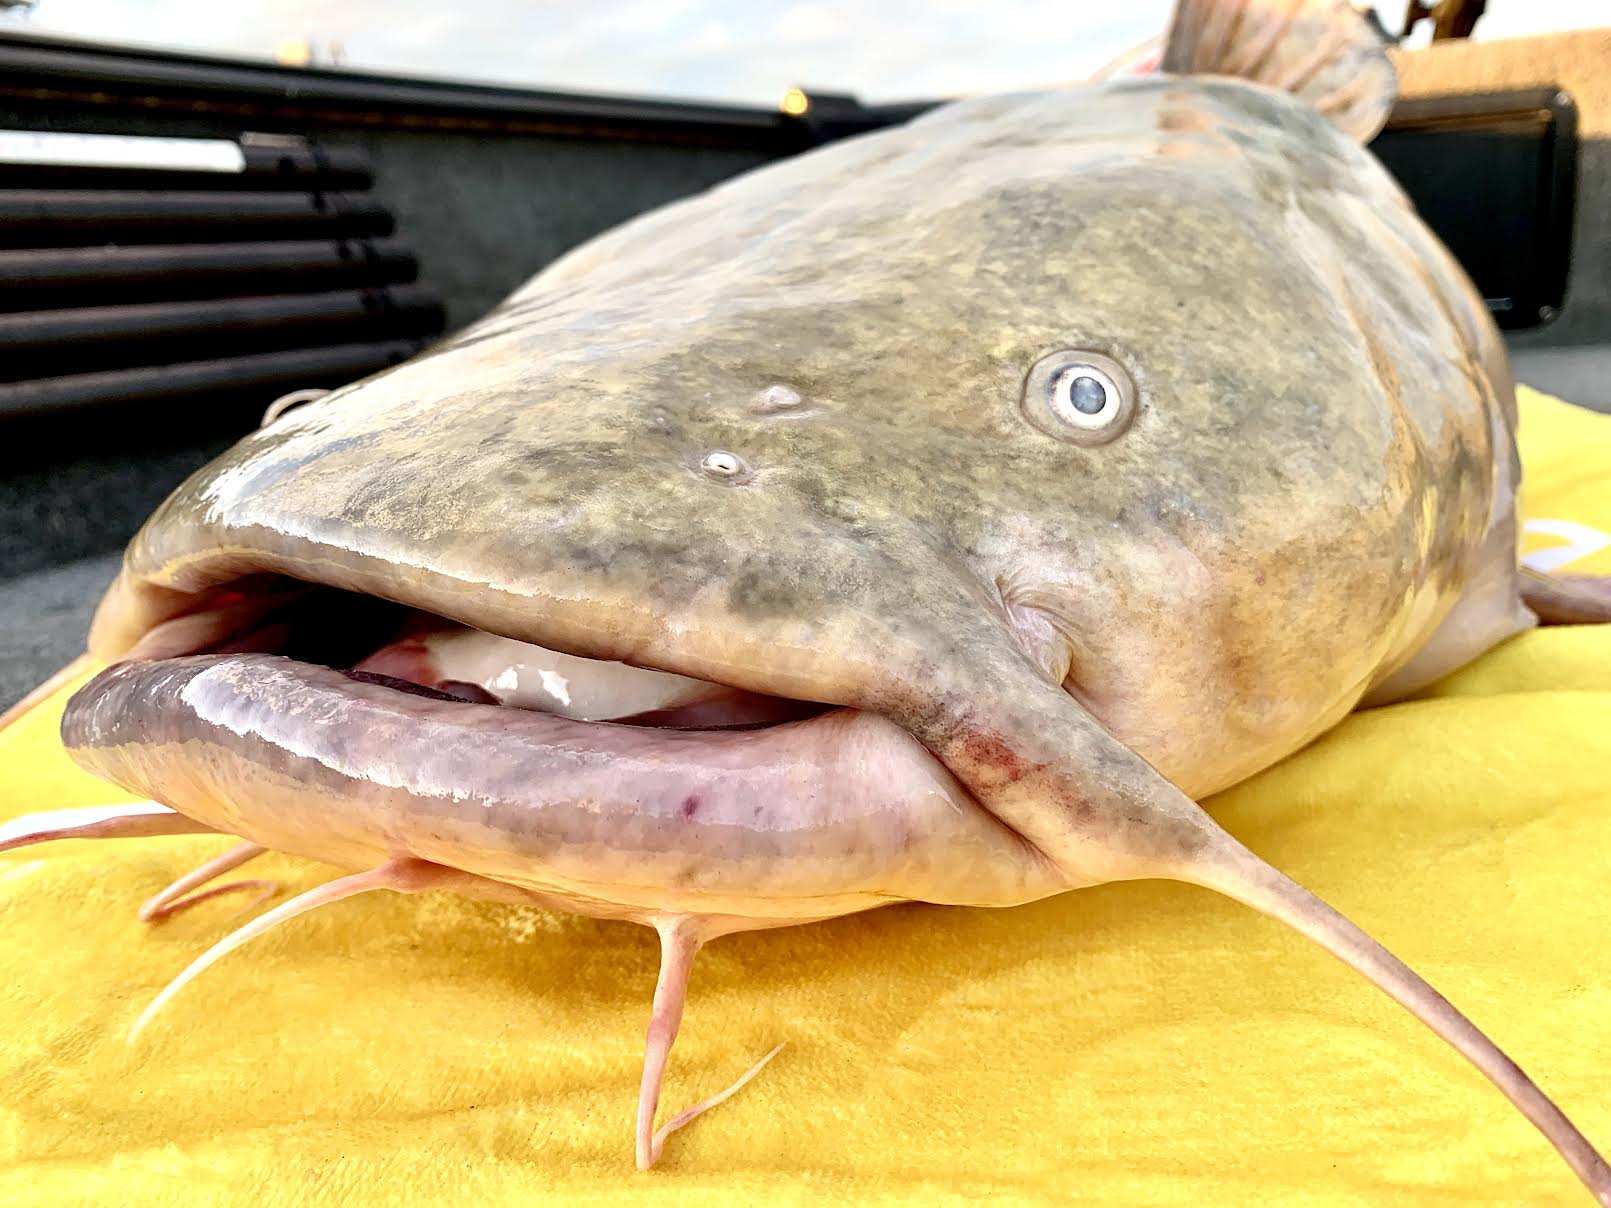 A potential new state-record flathead catfish